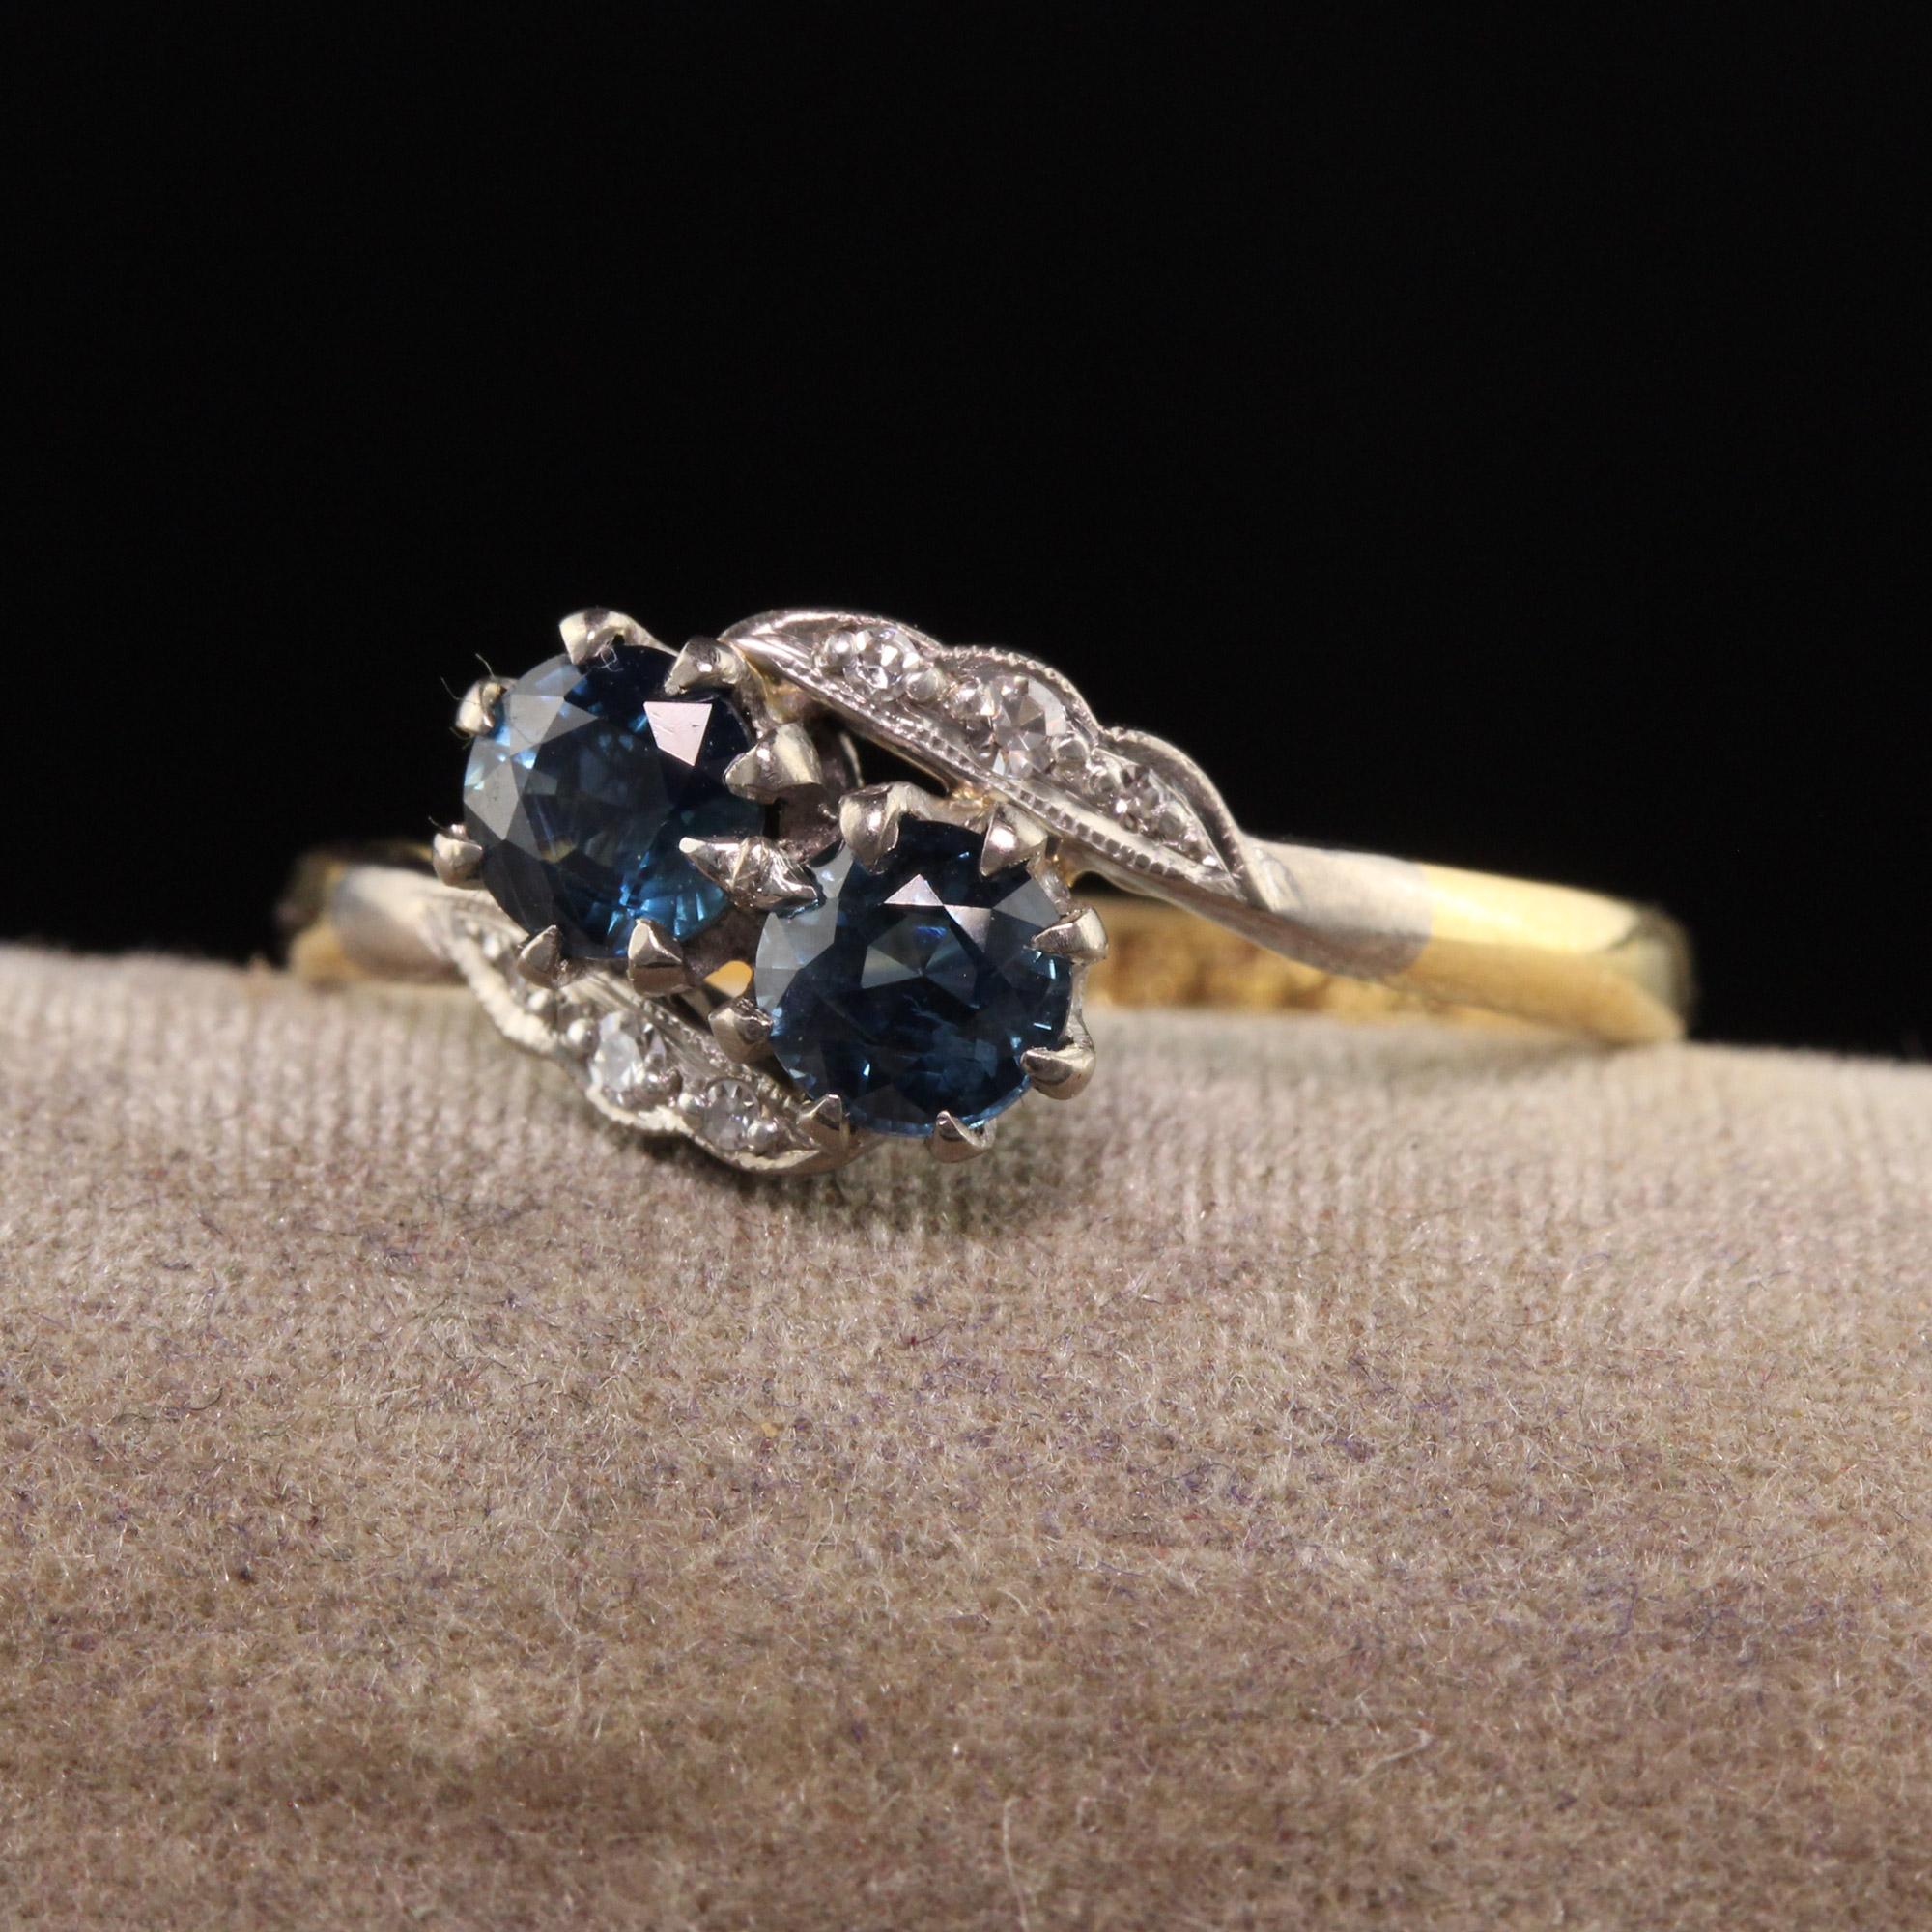 Beautiful Antique Edwardian 18K Yellow Gold and Platinum Toi et Moi Sapphire Diamond Ring. This beautiful ring is crafted in 18k yellow gold and platinum. It has two beautiful sapphires in the center with single cut diamonds on the sides.

Item